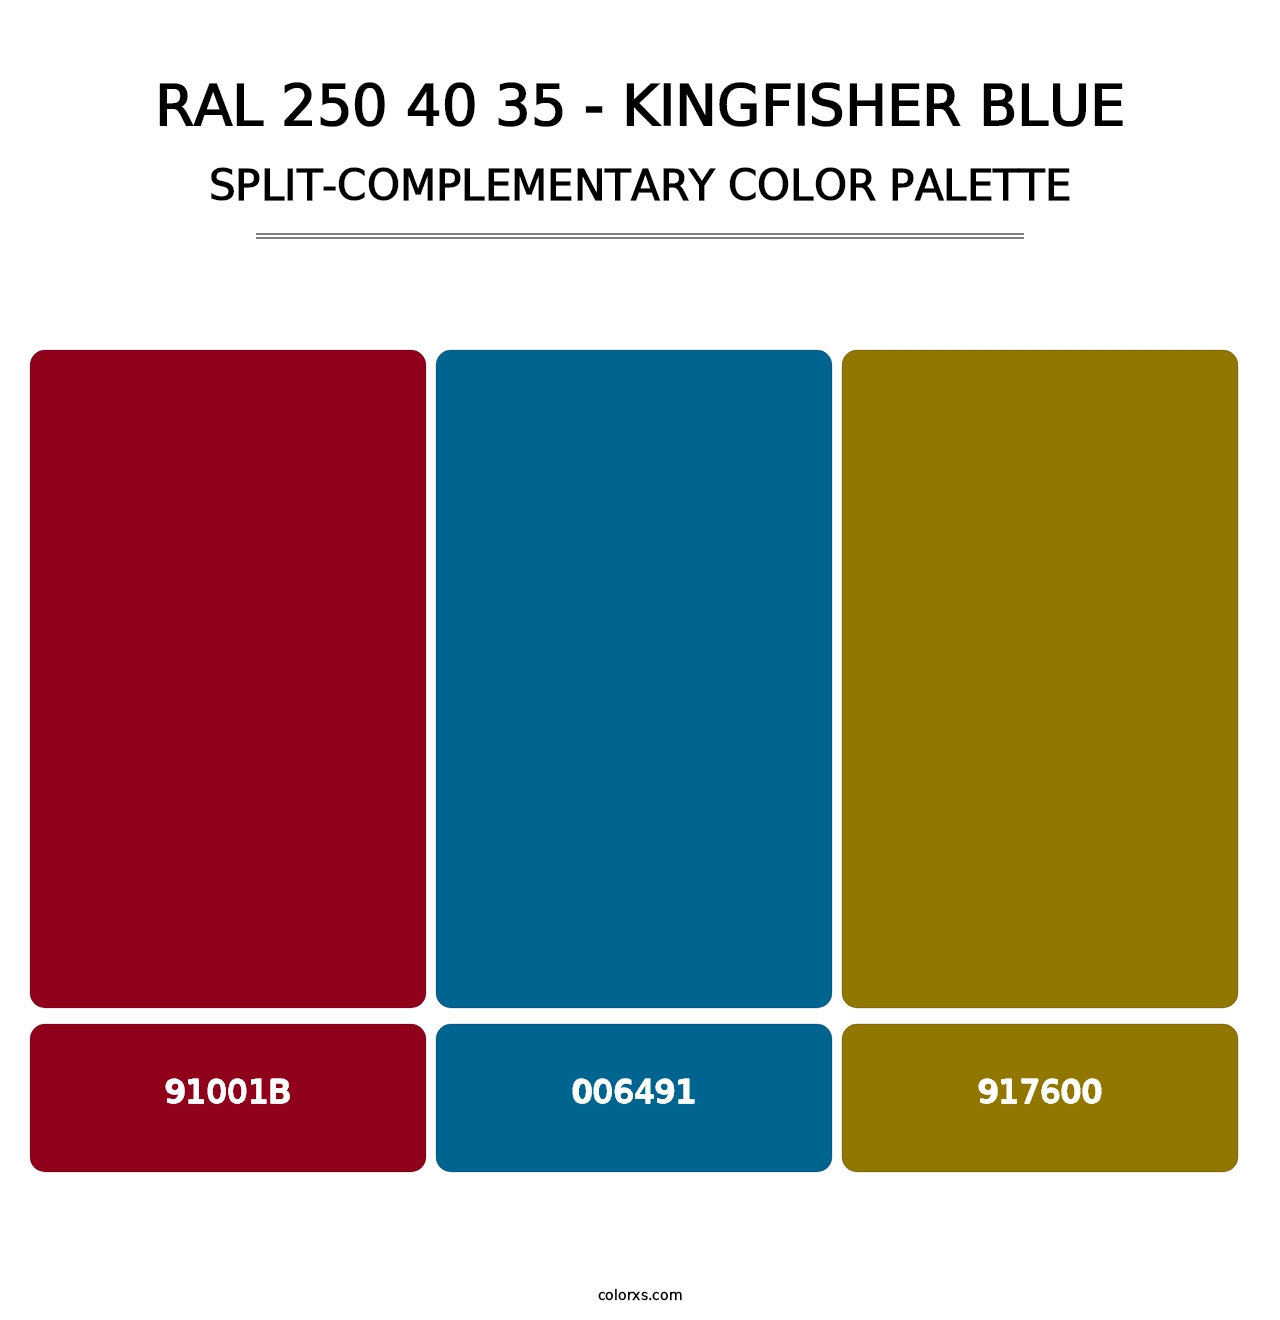 RAL 250 40 35 - Kingfisher Blue - Split-Complementary Color Palette